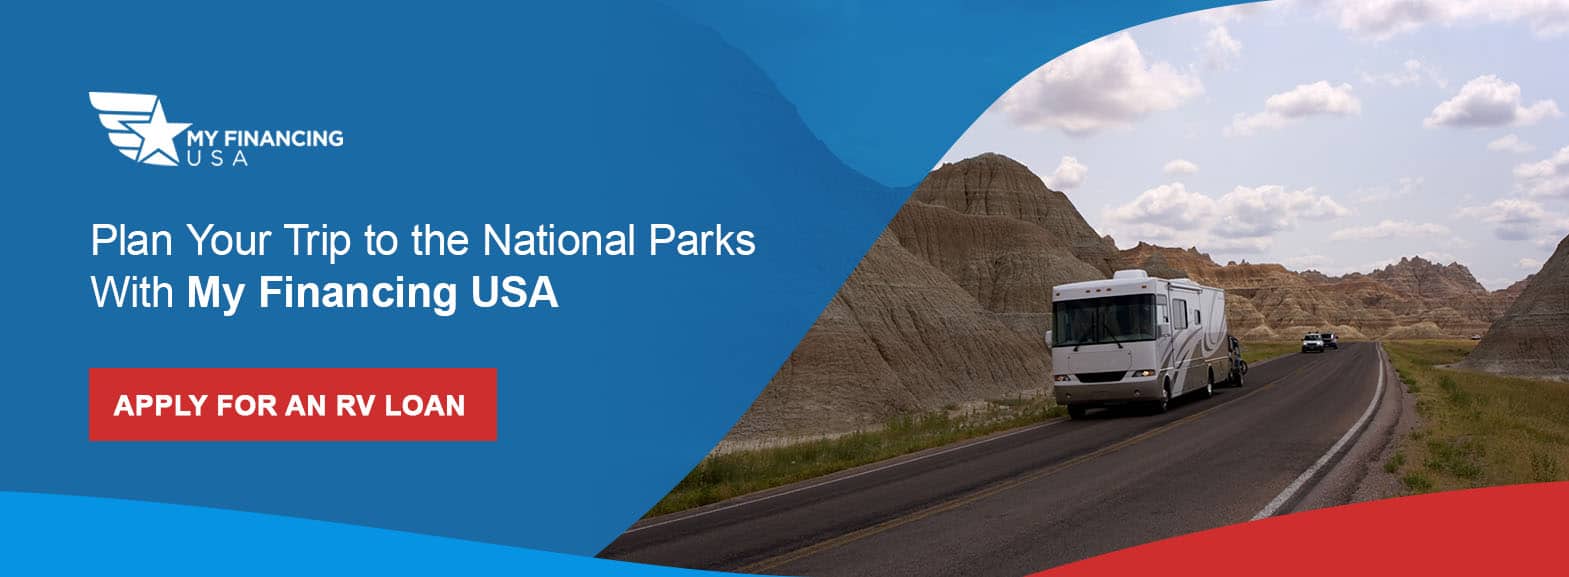 Plan Your Trip to the National Parks With My Financing USA